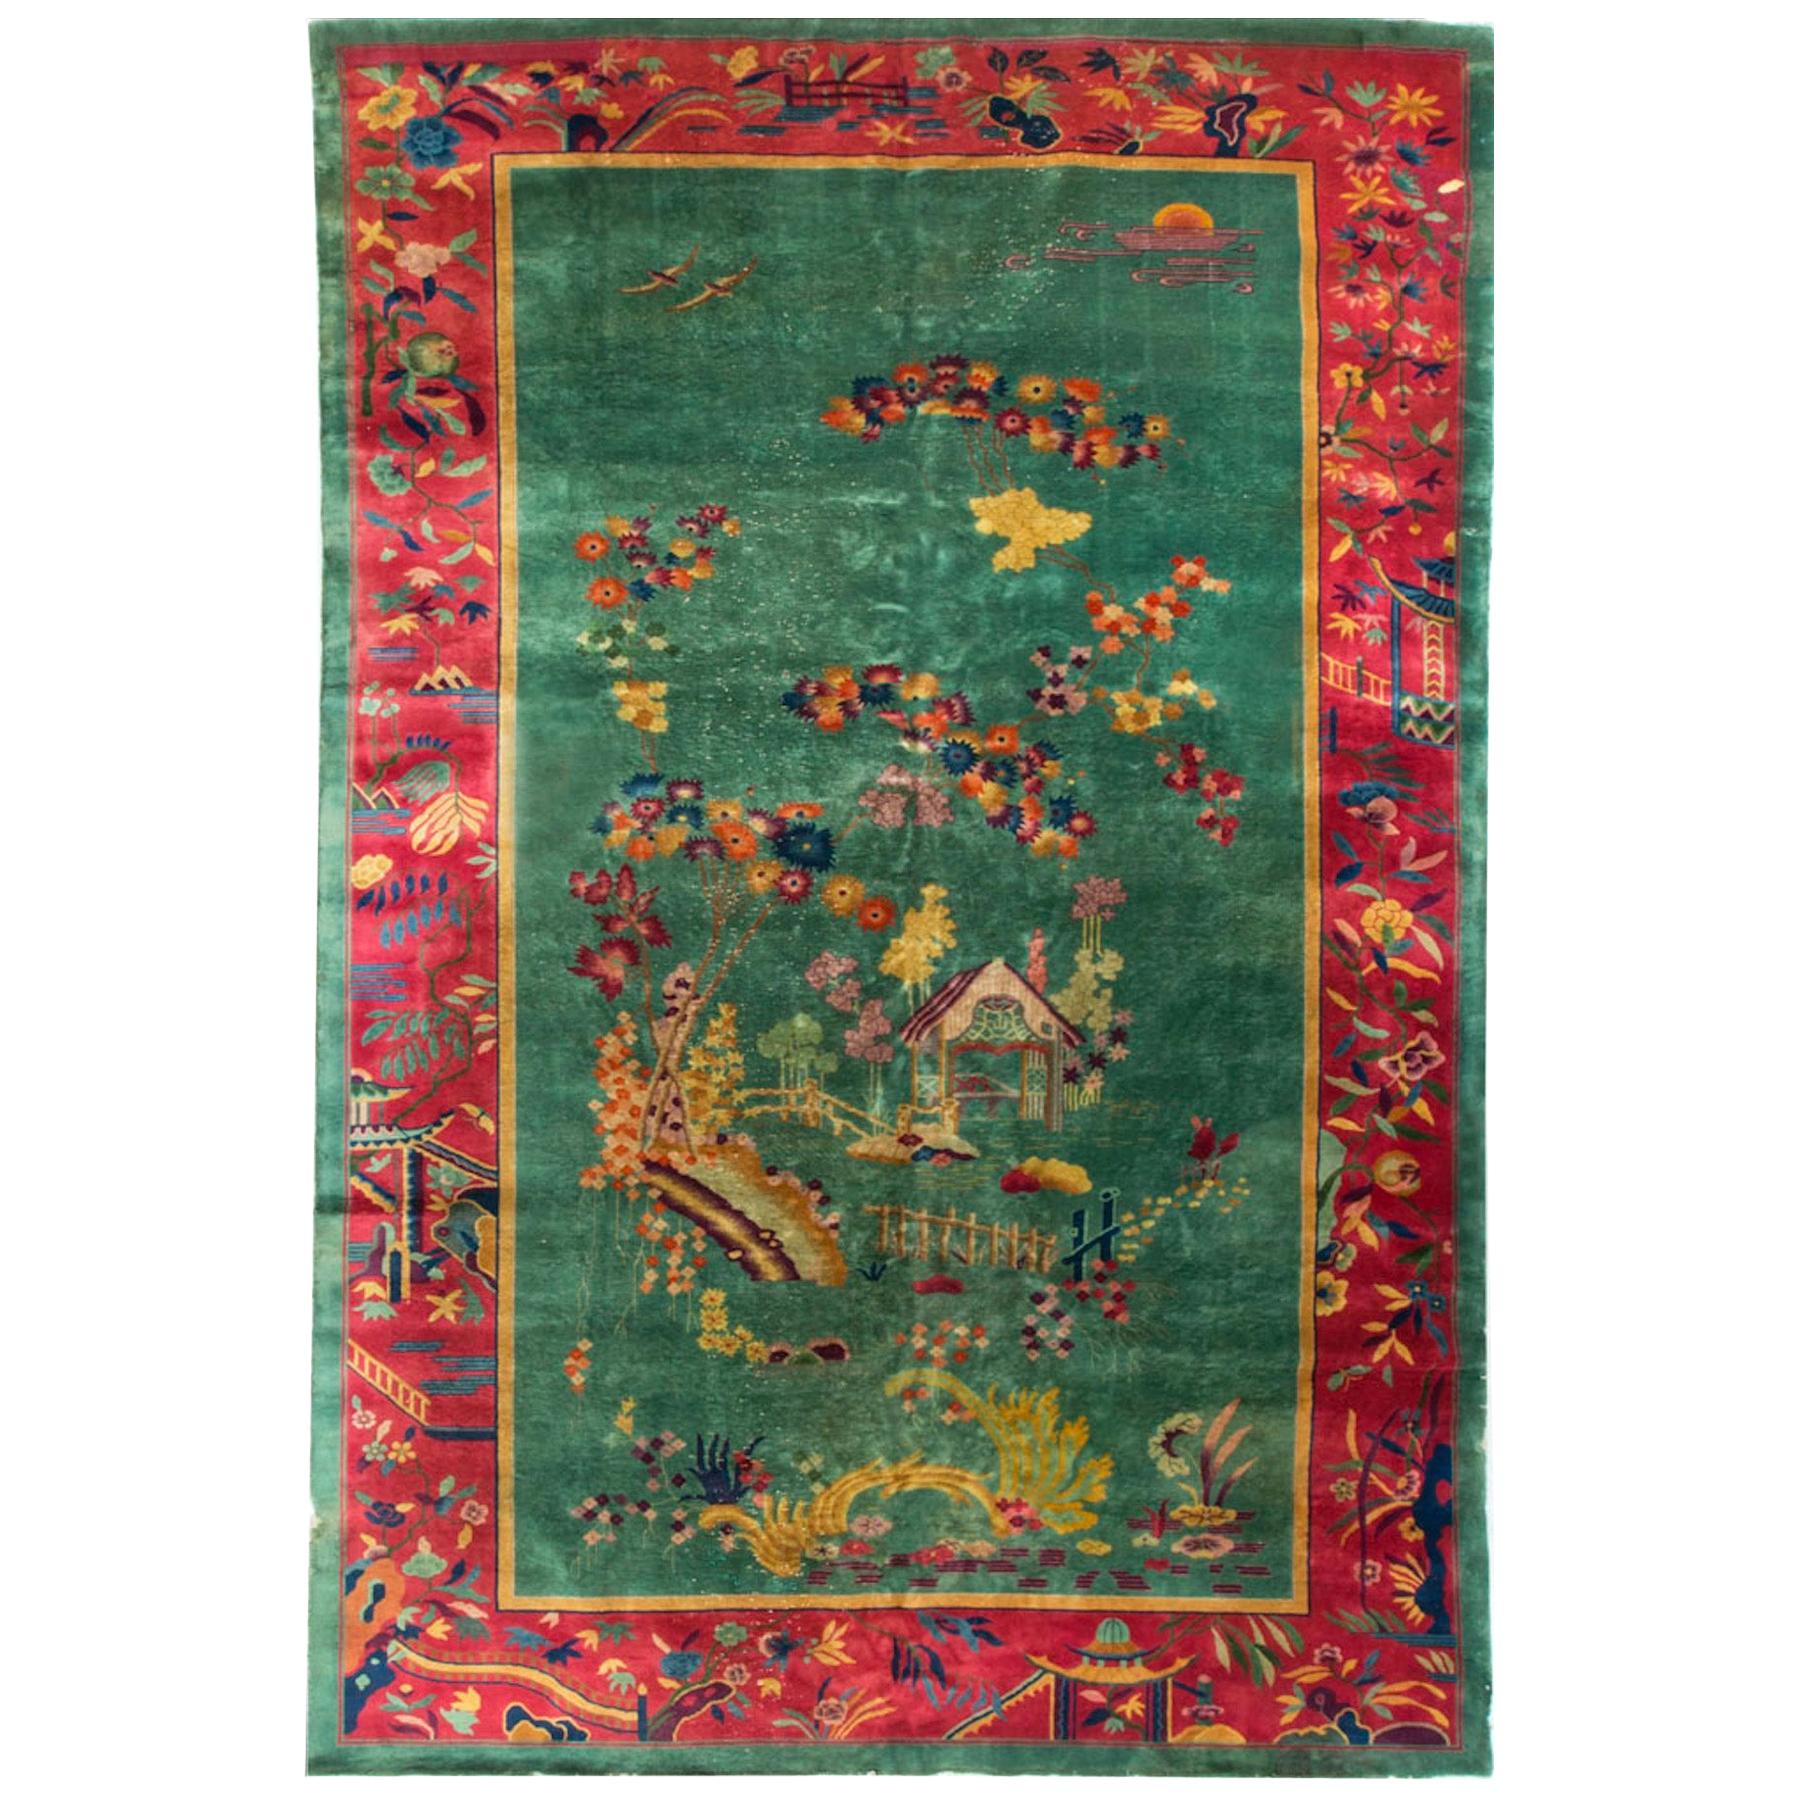 Tapis pictural chinois vintage Nichols, vers 1920  10'8"" x 18'5"